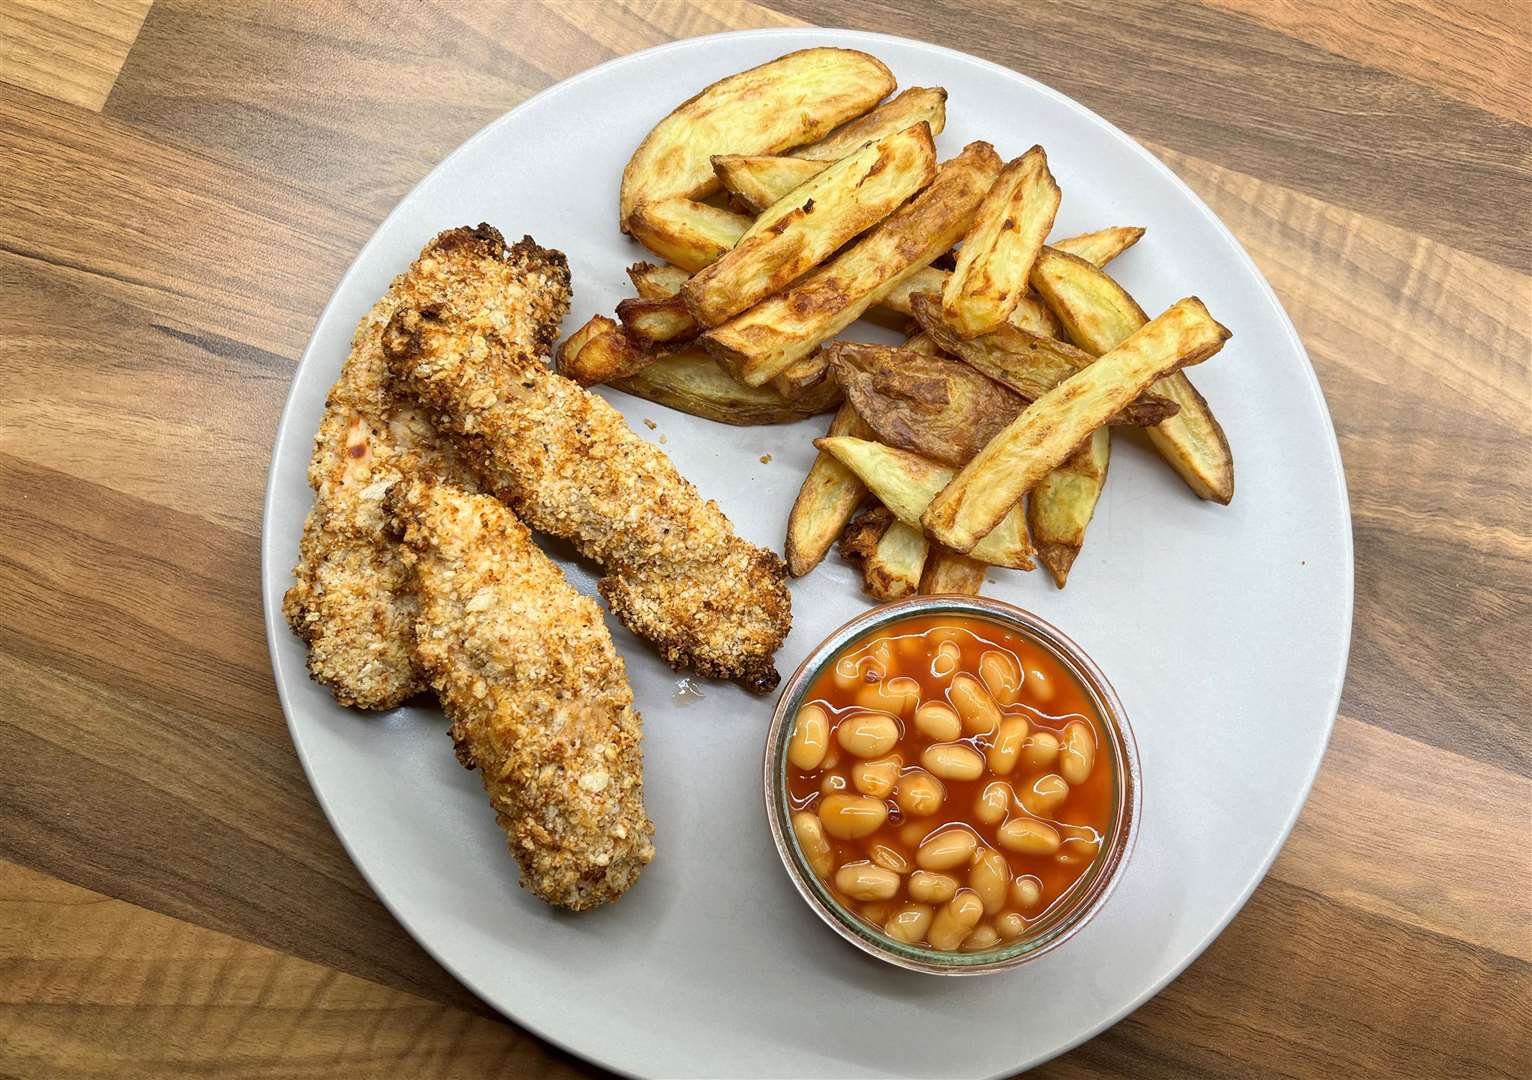 Chantal's healthy take on a KFC included homemade chips and beans alongside her chicken